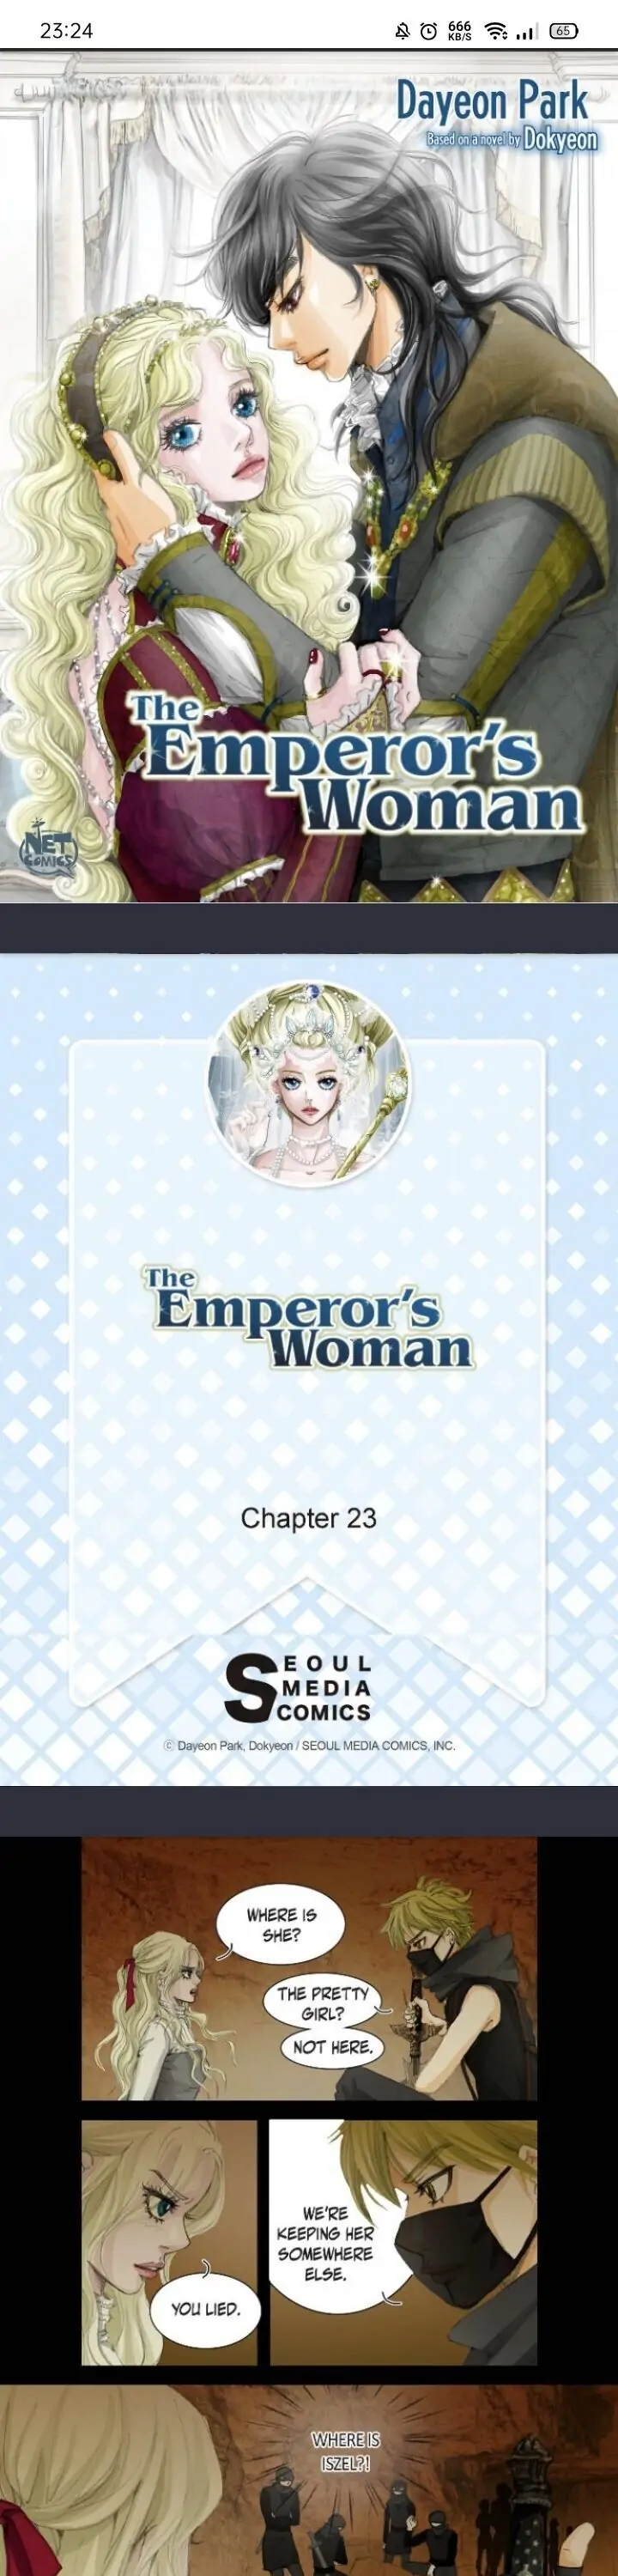 The Emperor’s Woman chapter 24